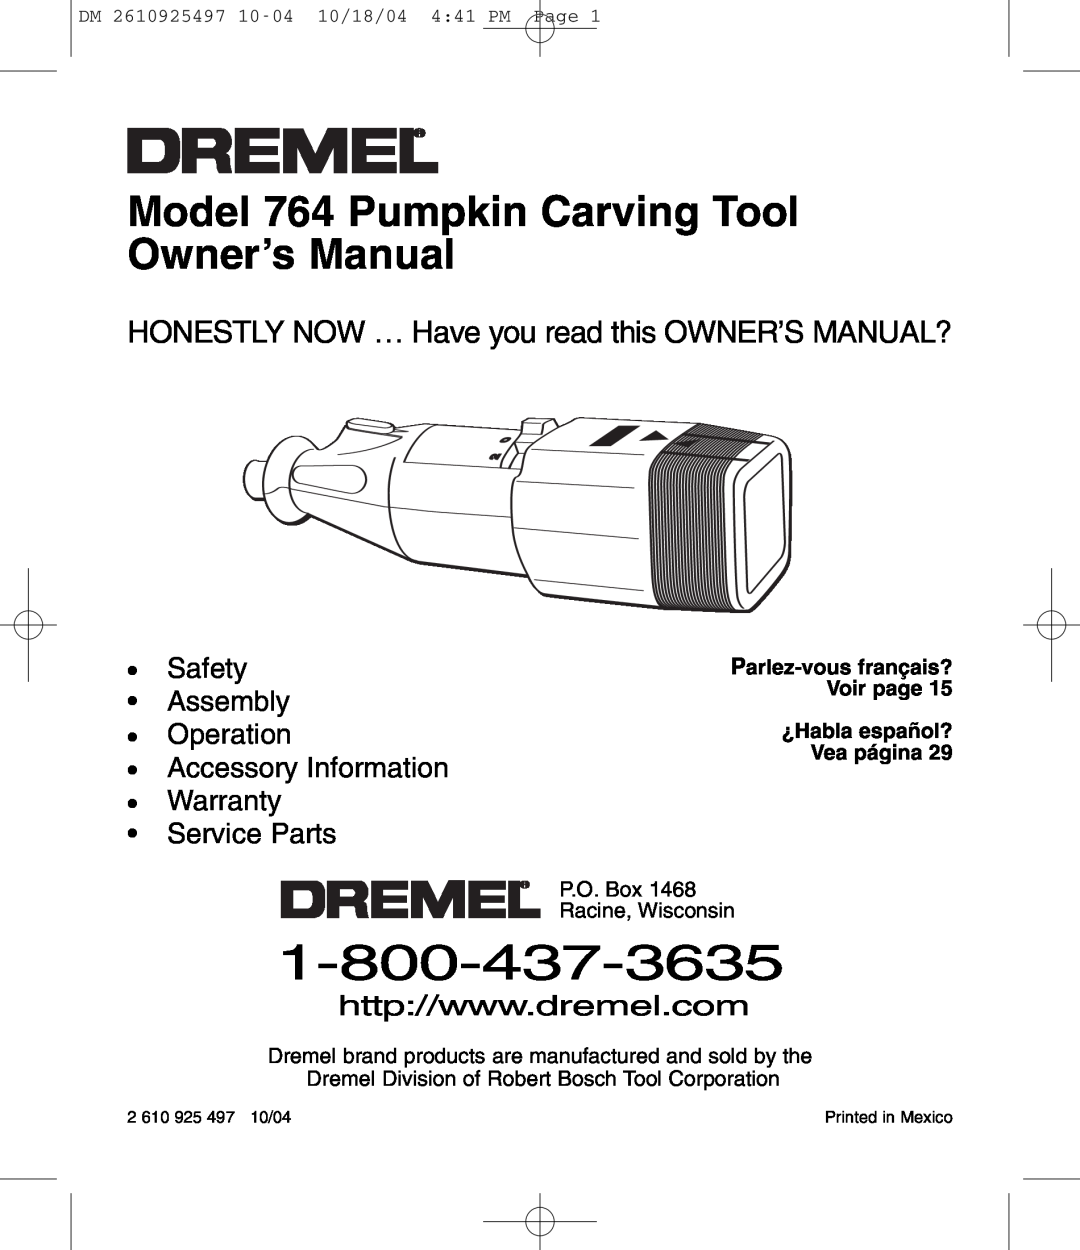 Dremel 764 owner manual Safety Assembly Operation Accessory Information Warranty, Service Parts 